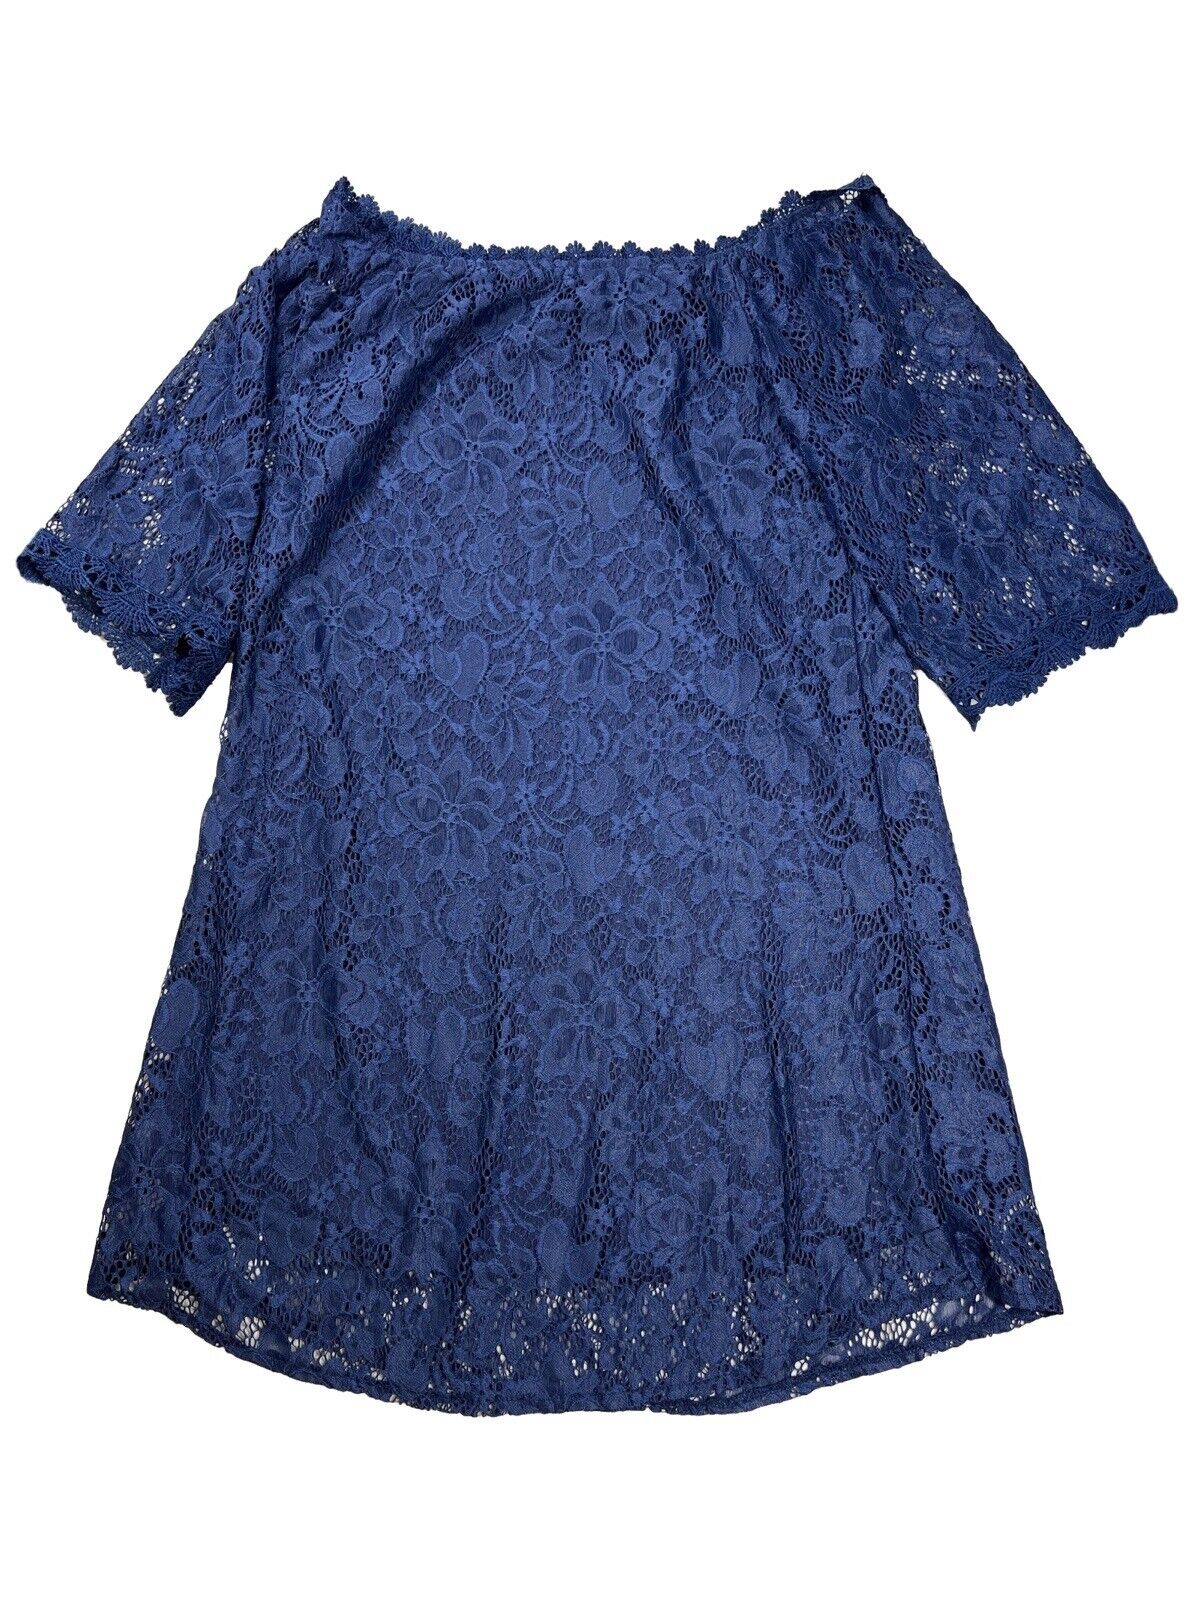 NEW Ours Women's Blue Lace Lined Shift Dress - M